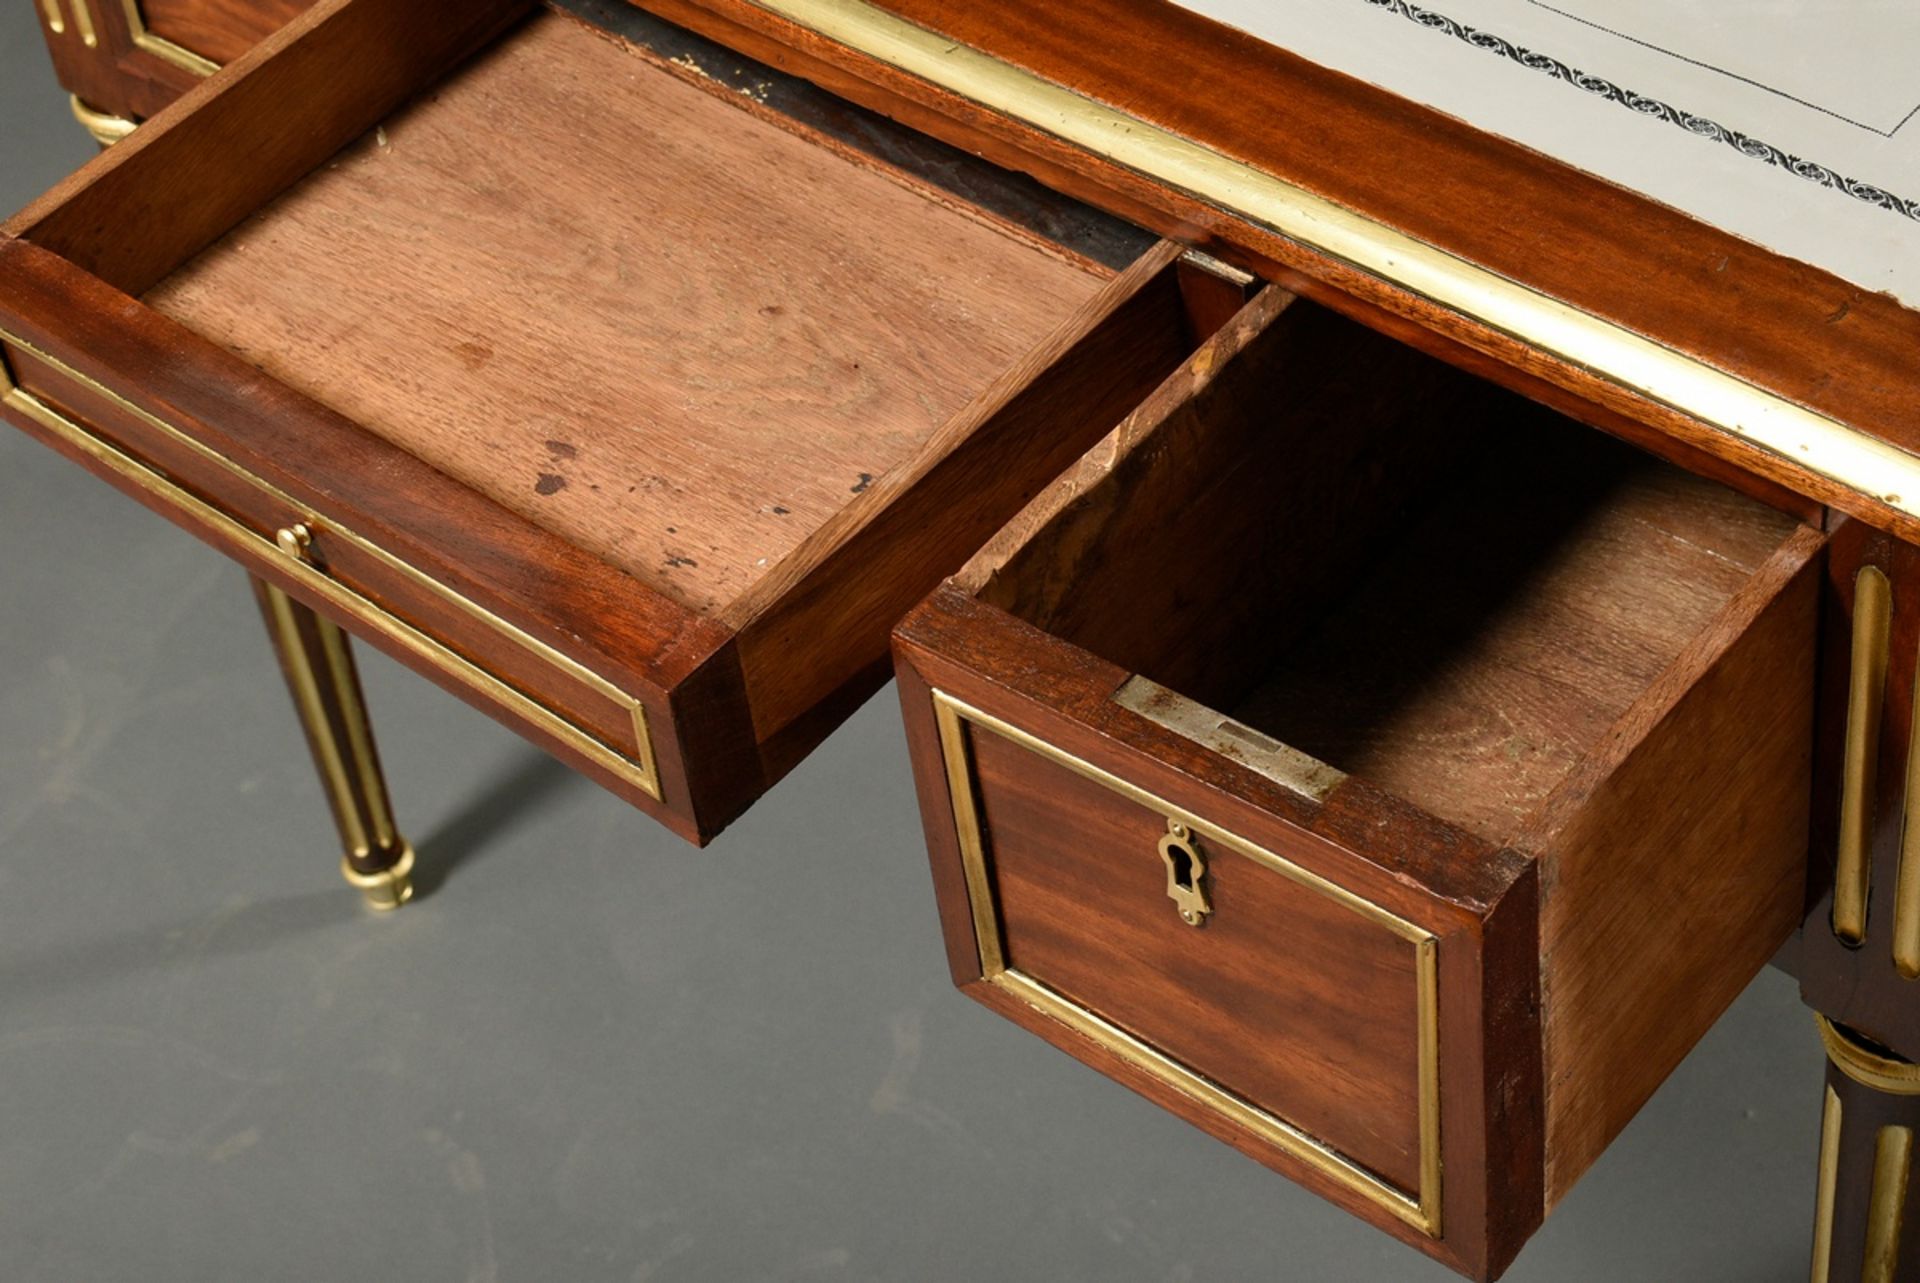 Classicist lady's desk with 3 drawers in the frame on fluted legs, mahogany with gilded brass inlay - Image 5 of 5